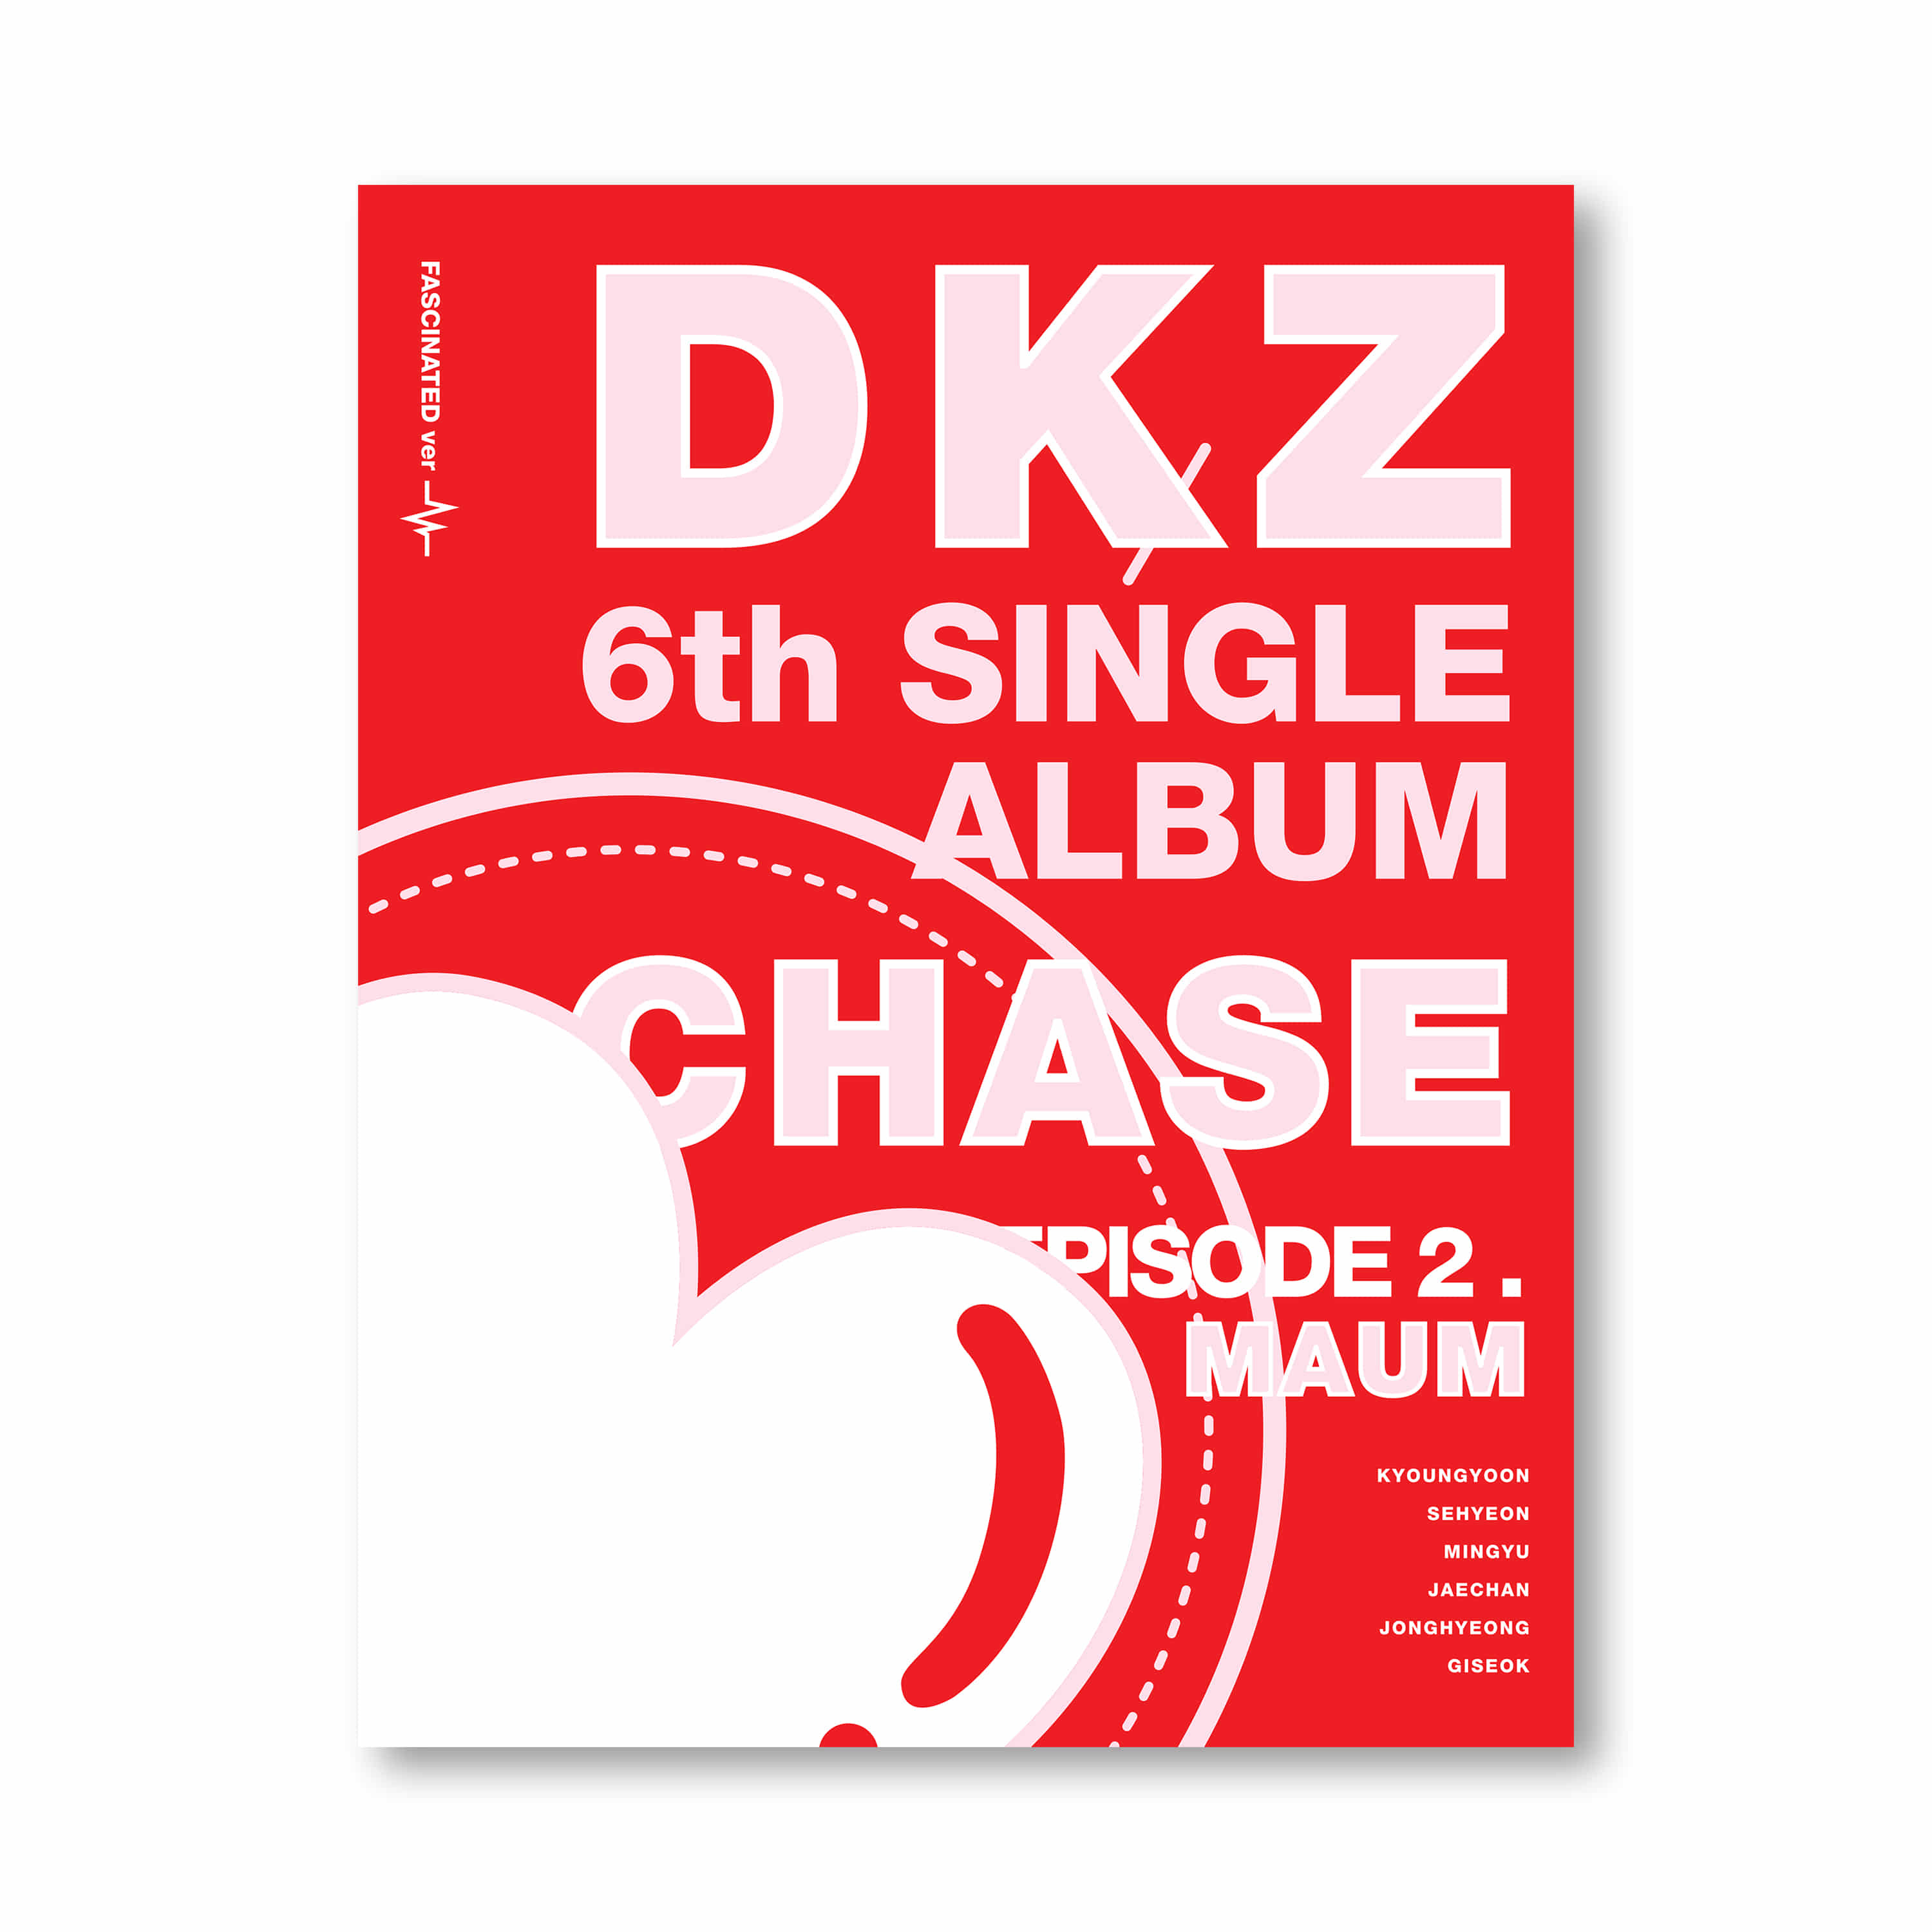 DKZ (디케이지) - 싱글 6집 [CHASE EPISODE 2. MAUM] (FASCINATED ver.)